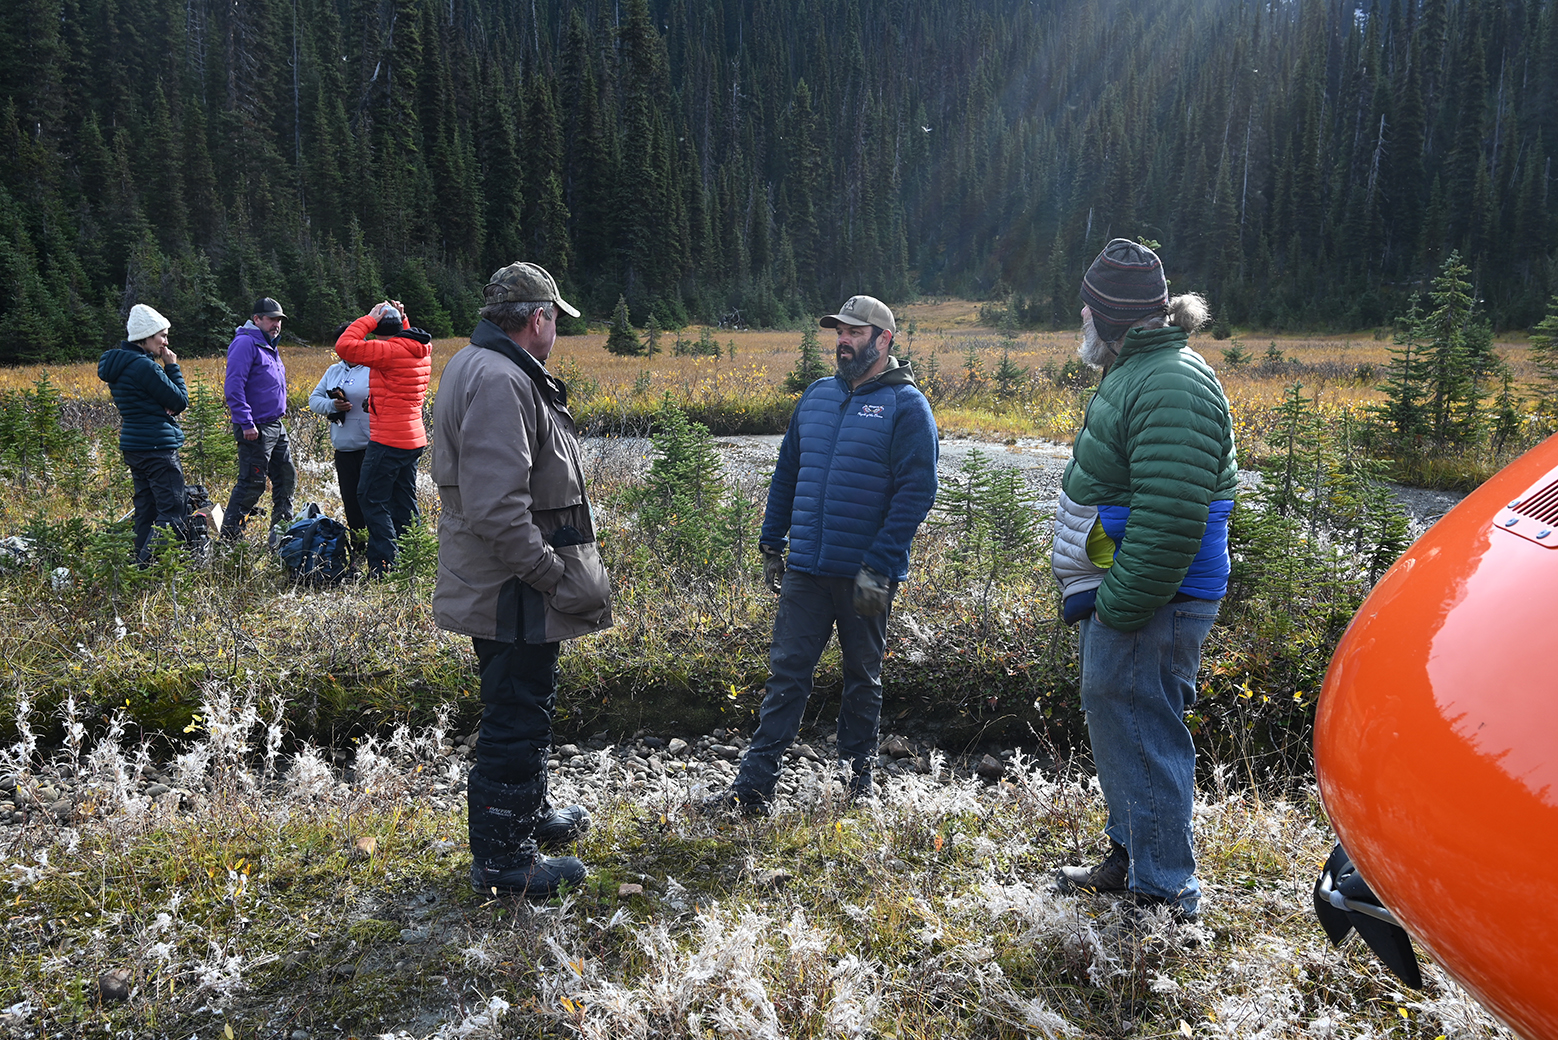 Simpcw First Nation Chief George Lampreau chats with people during a helicopter visit to the Raush Valley.